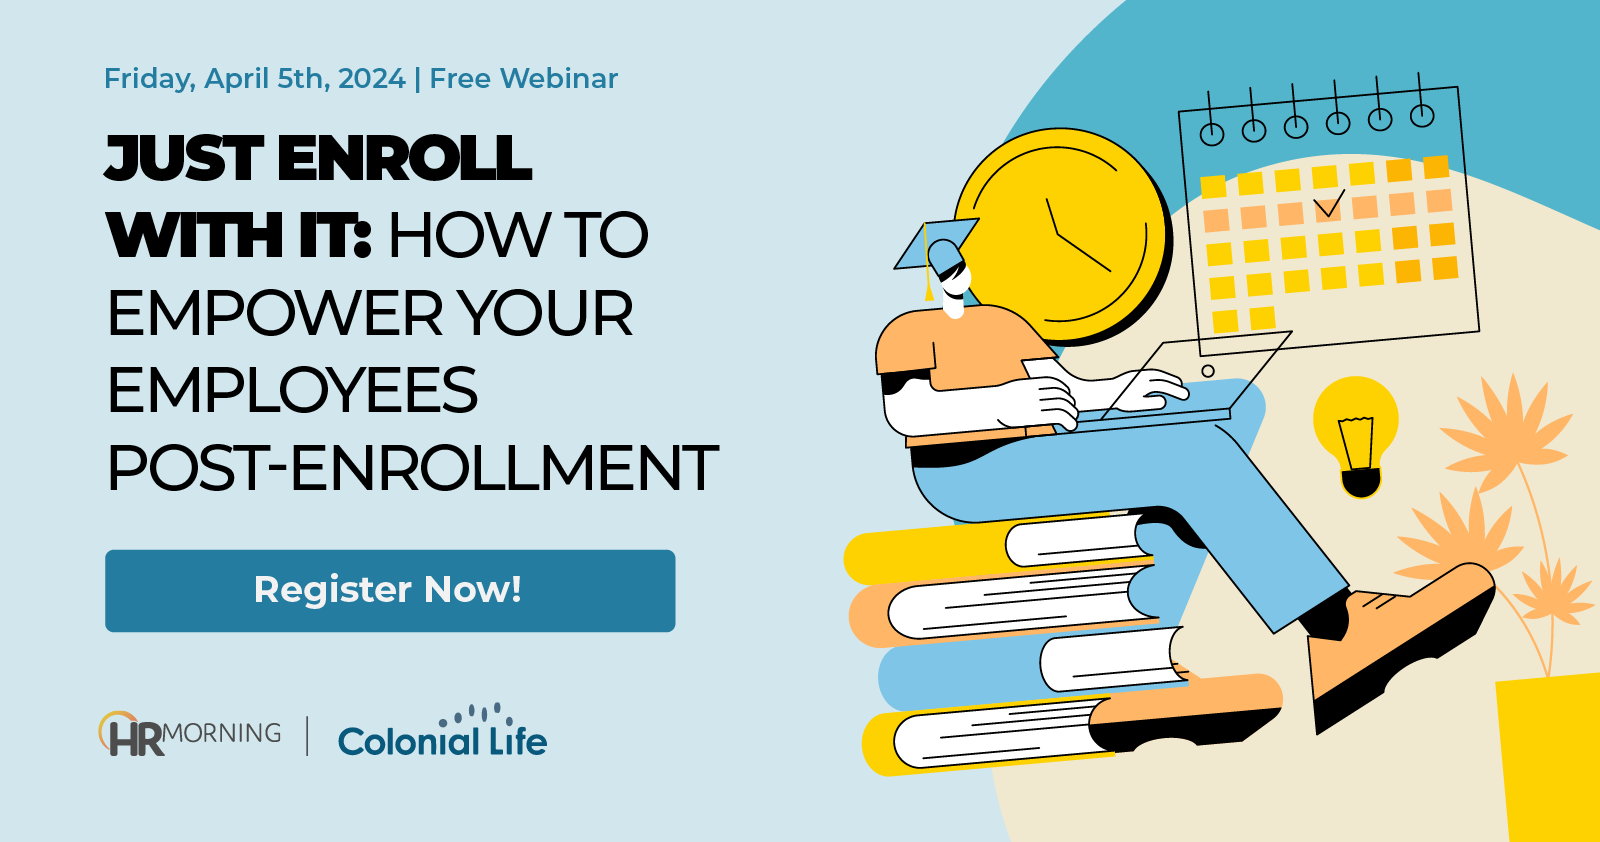 Just enroll with it: How to empower your employees post-enrollment